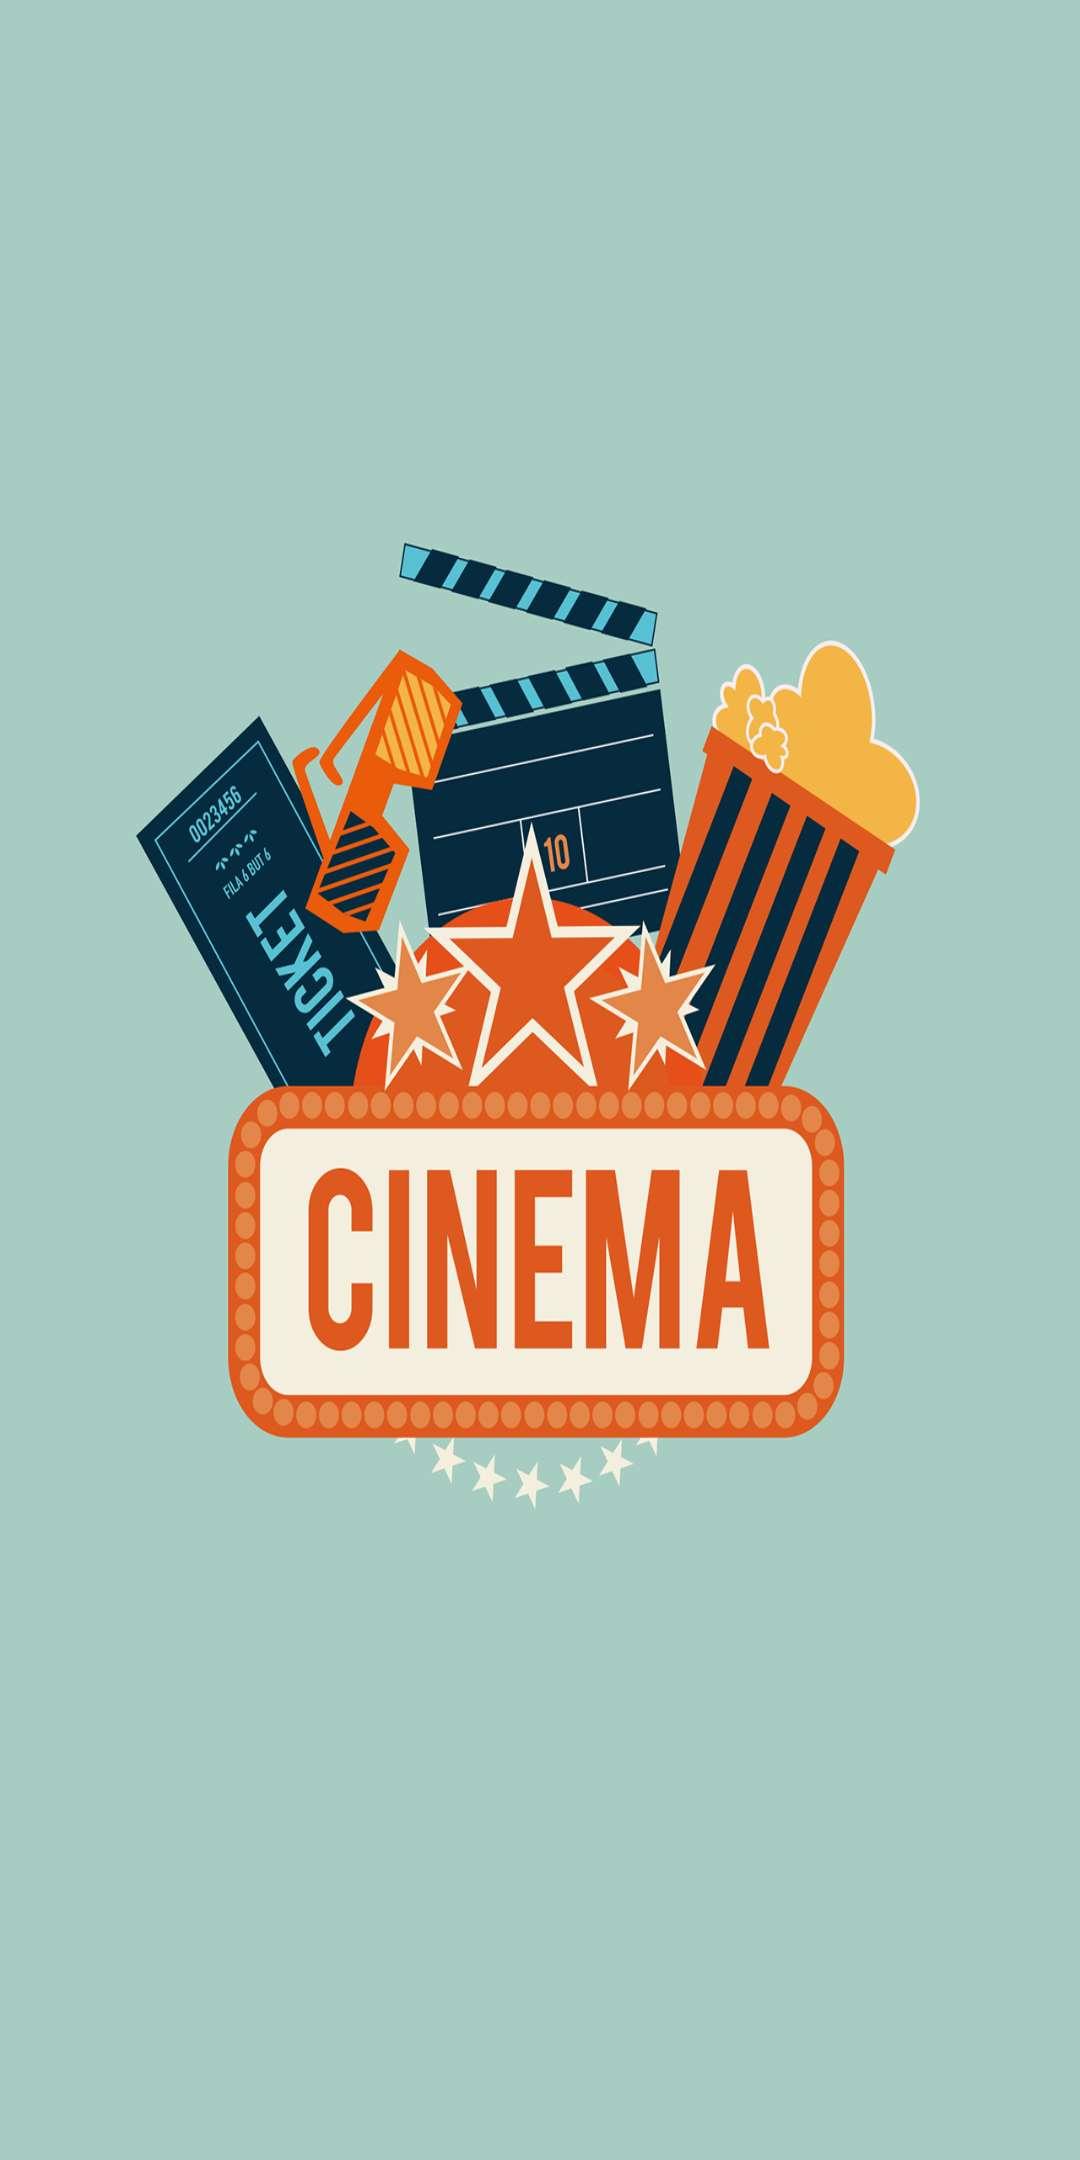 Cine Box for Android - APK Download